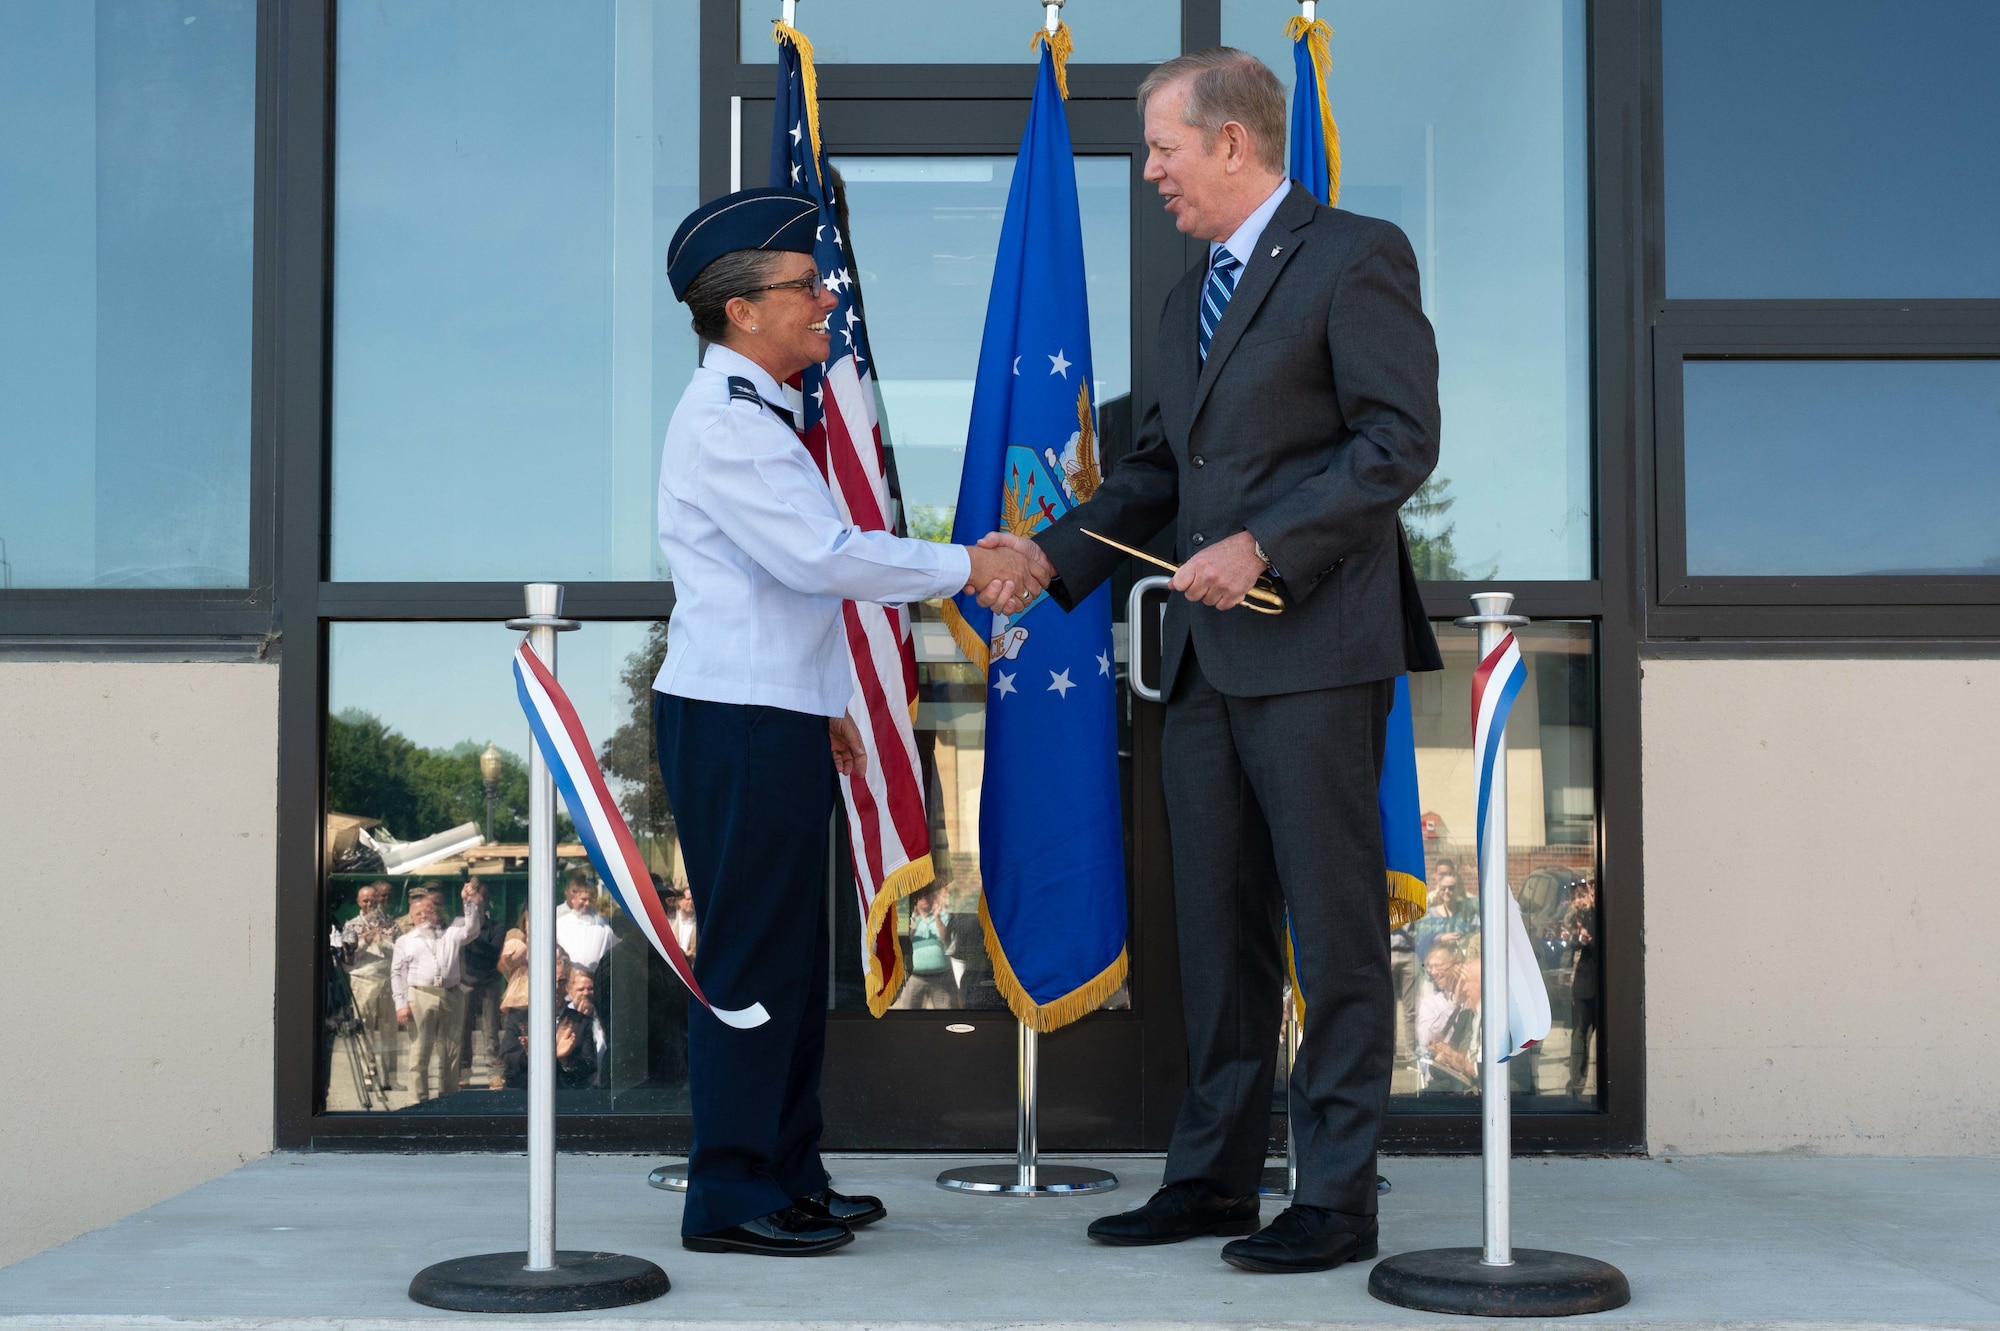 Col. Katrina Stephens, commander, 66th Air Base Group, Hanscom Air Force Base, Mass., and Scott Hardiman, Air Force Nuclear Weapons Center director for Nuclear Command, Control and Communications (NC3) Integration and Air Force program executive officer for NC3, shake hands during a ribbon-cutting ceremony at Hanscom June 6. The ceremony marked the grand opening of building 1102, a 56,000-square-foot facility on base that will provide space for approximately 240 AFNWC personnel, including about 90 unit personnel expected to move over from the MITRE Corp.'s campus in Bedford, Mass. (U.S. Air Force photo by Jerry Saslav)